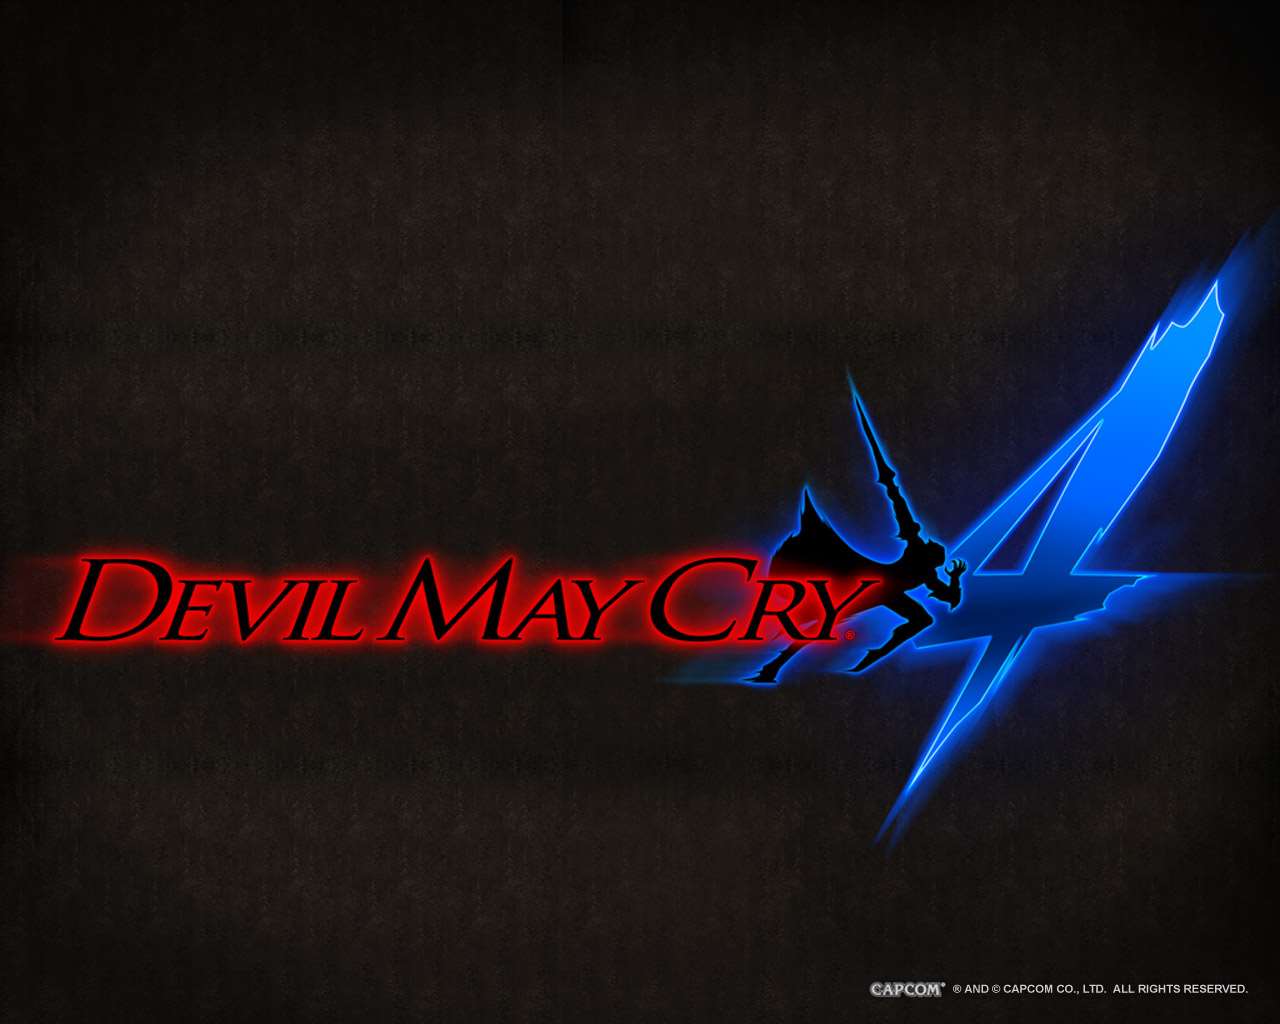 Official Devil May Cry 4 Wallpaper 3 (1280 x 1024)